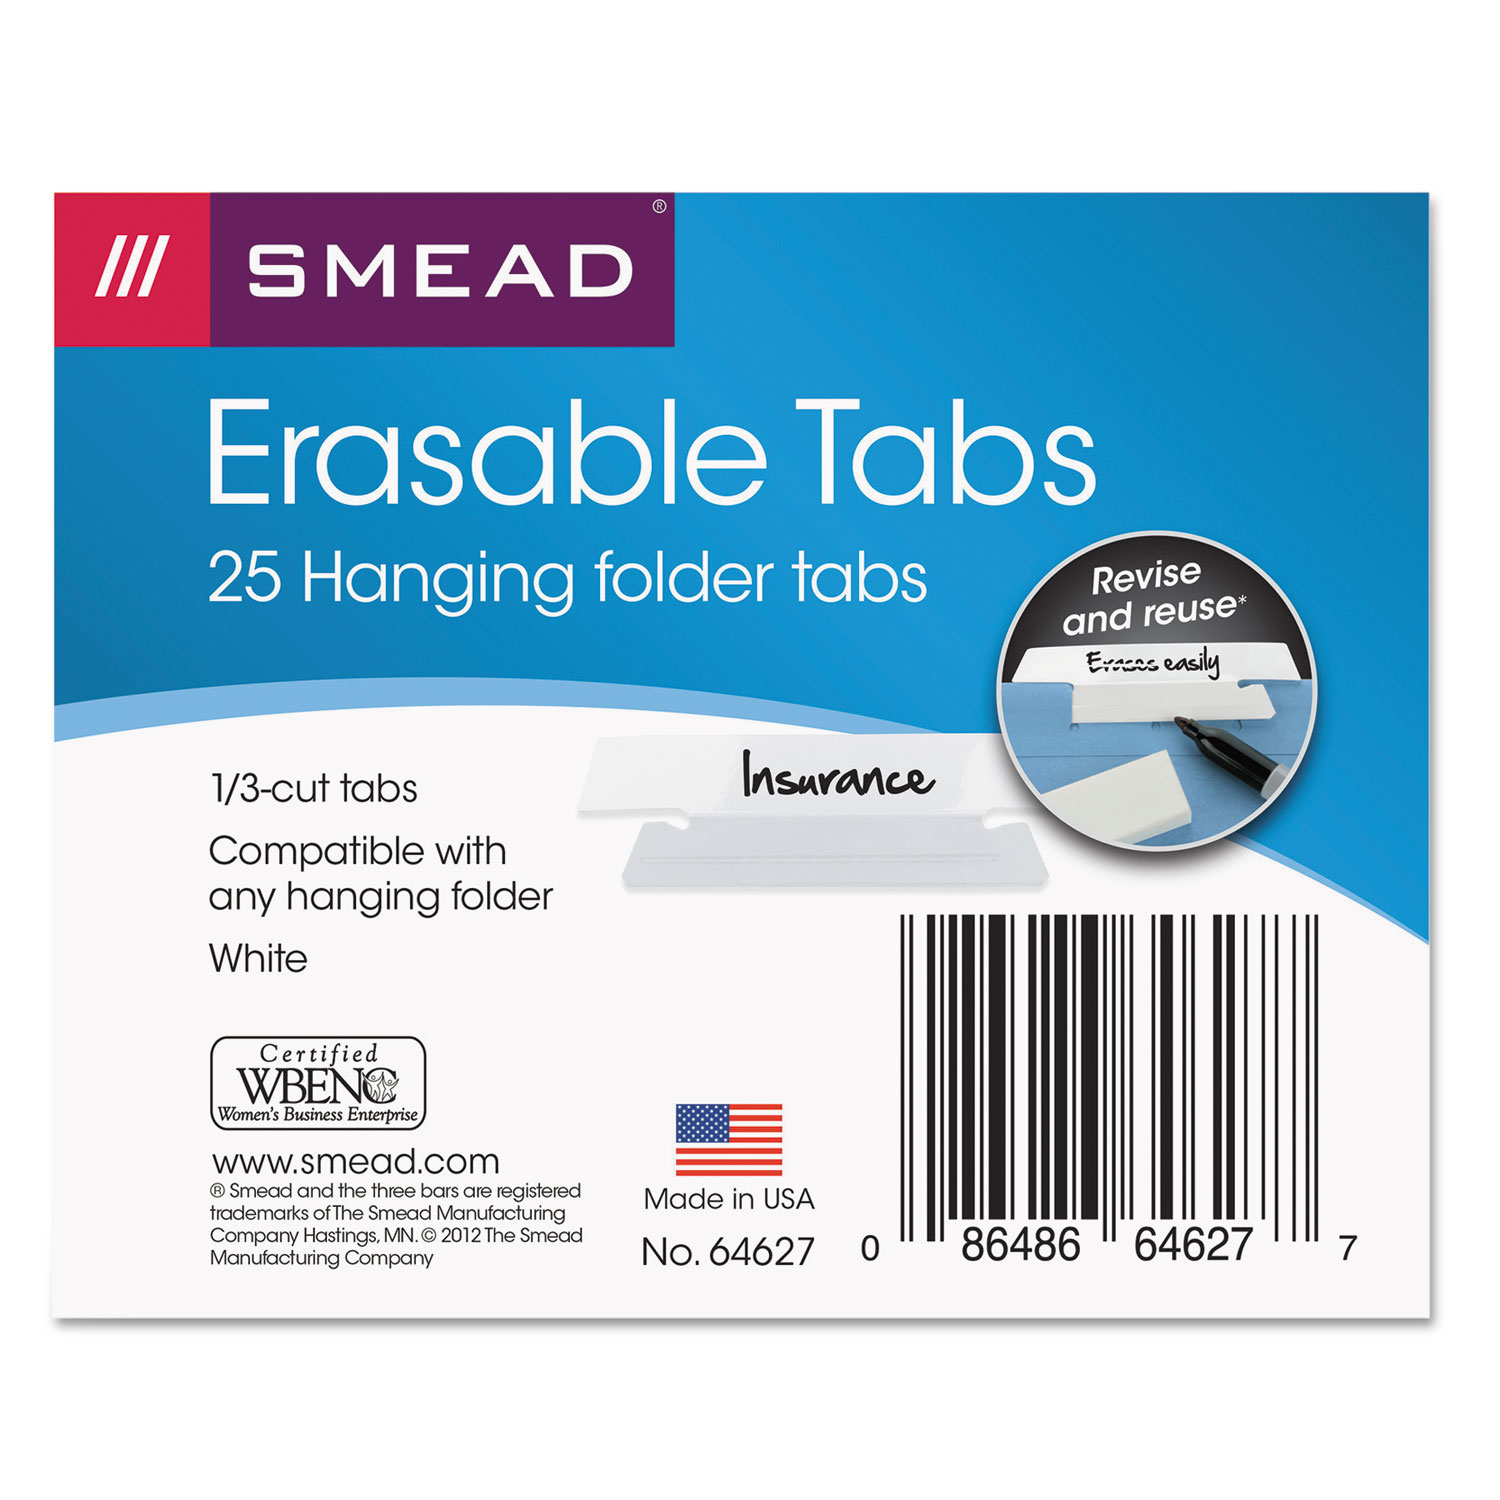  Smead 64627 Erasable Hanging Folder Tabs, 1/3-Cut Tabs, White, 3.5 Wide, 25/Pack (SMD64627) 